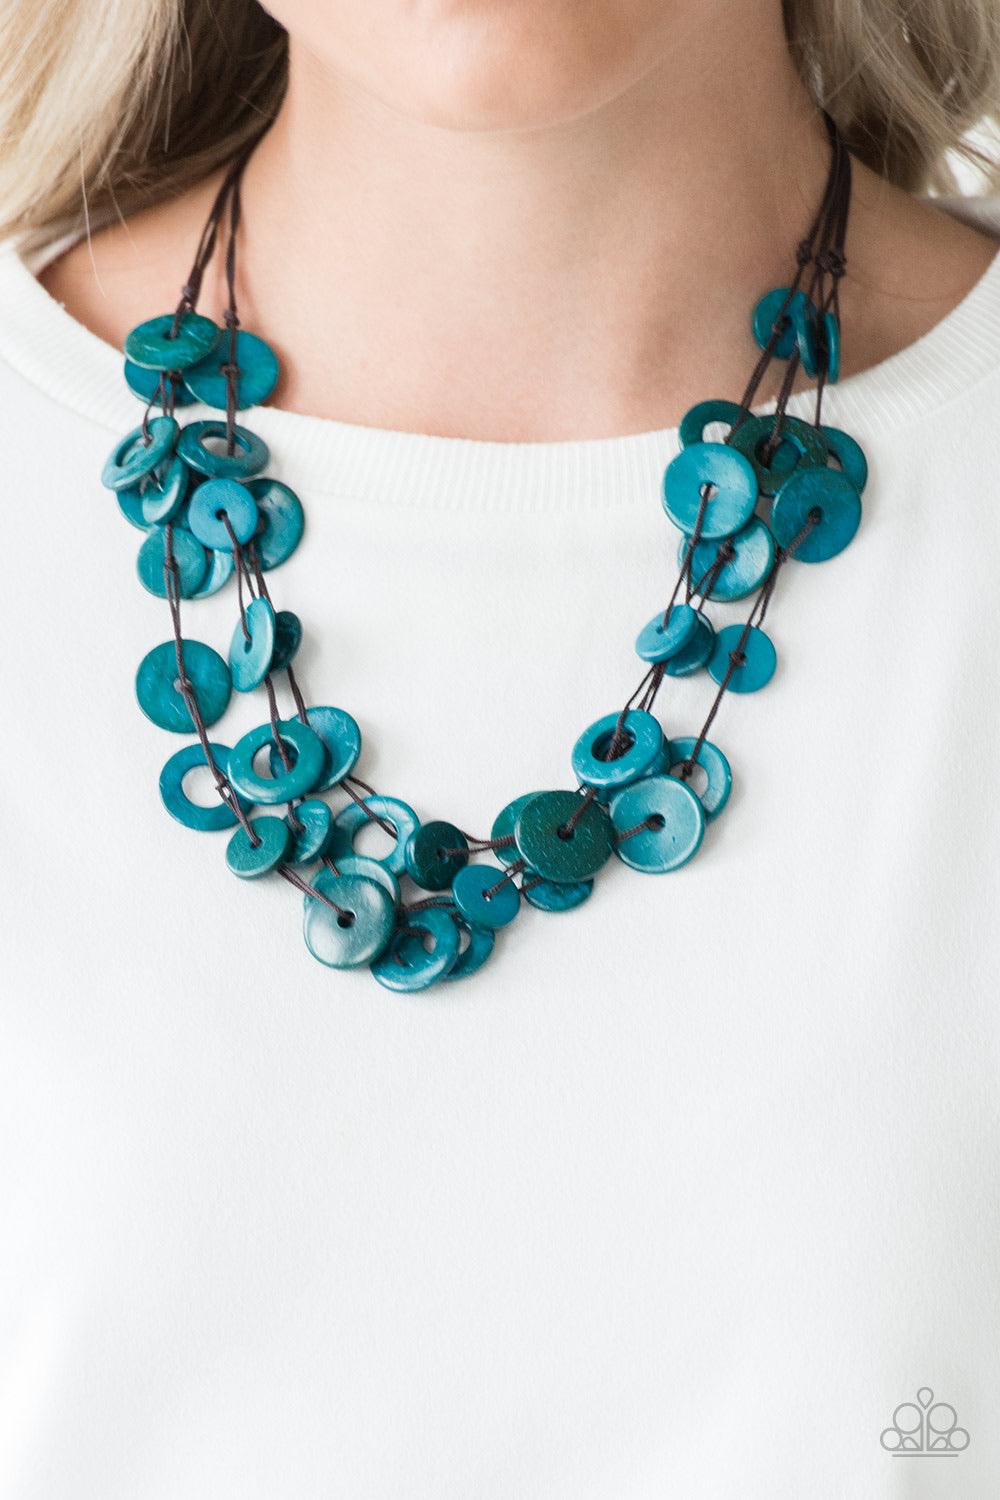 Paparazzi Accessories Wonderfully Walla Walla - Blue Shiny brown cording knots around mismatched blue wooden beads, creating vivacious layers. Features a button loop closure. Jewelry